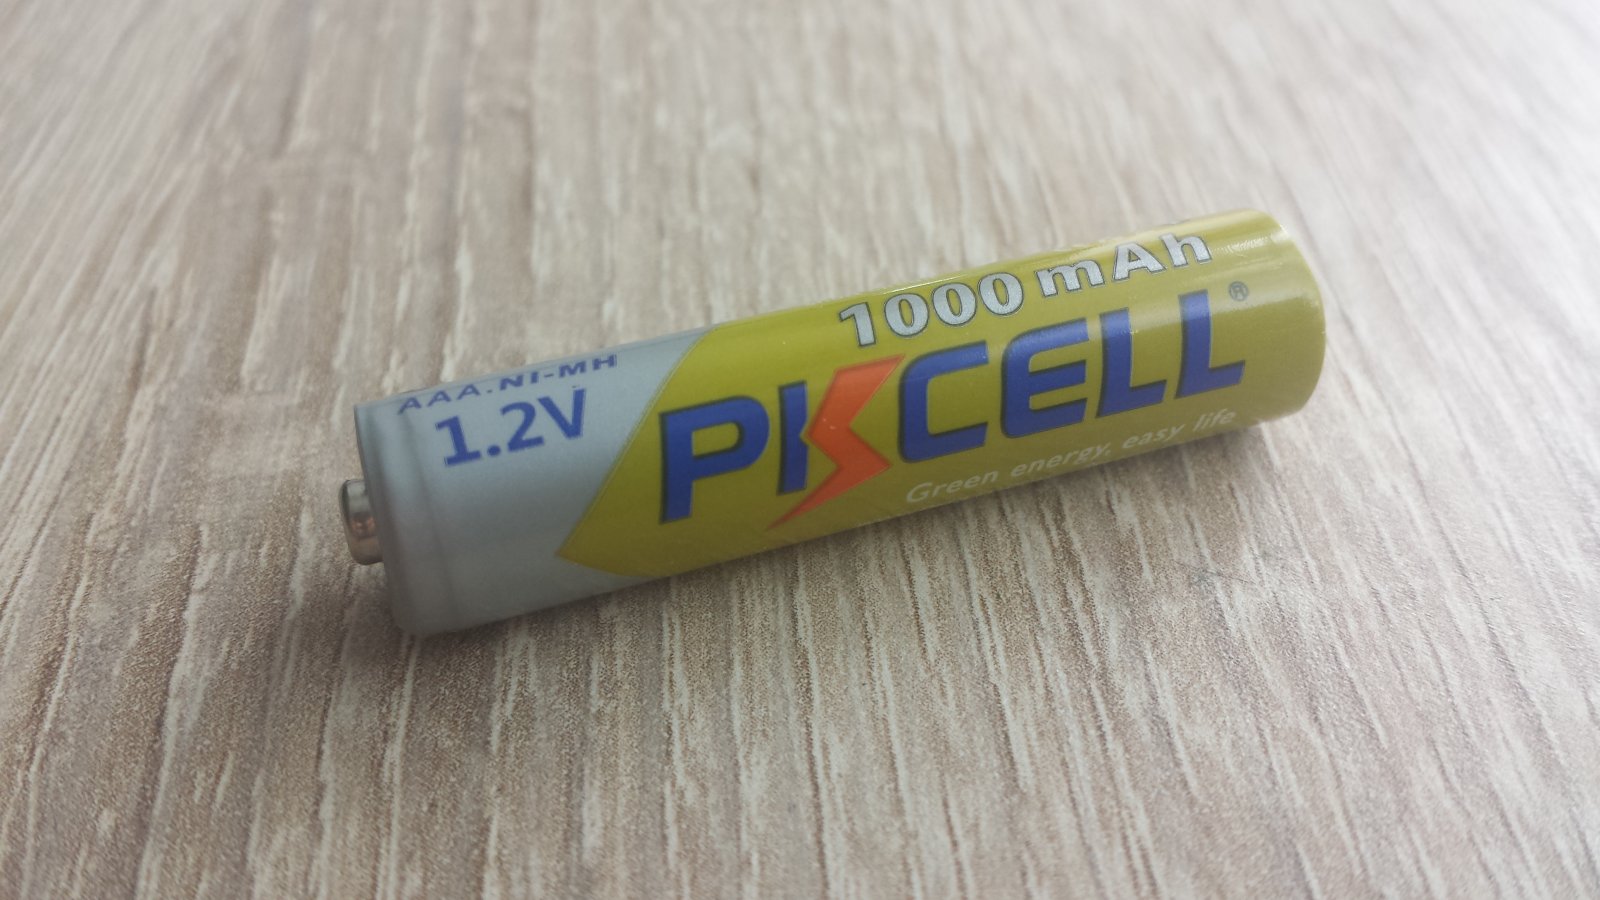 PKCell 1000